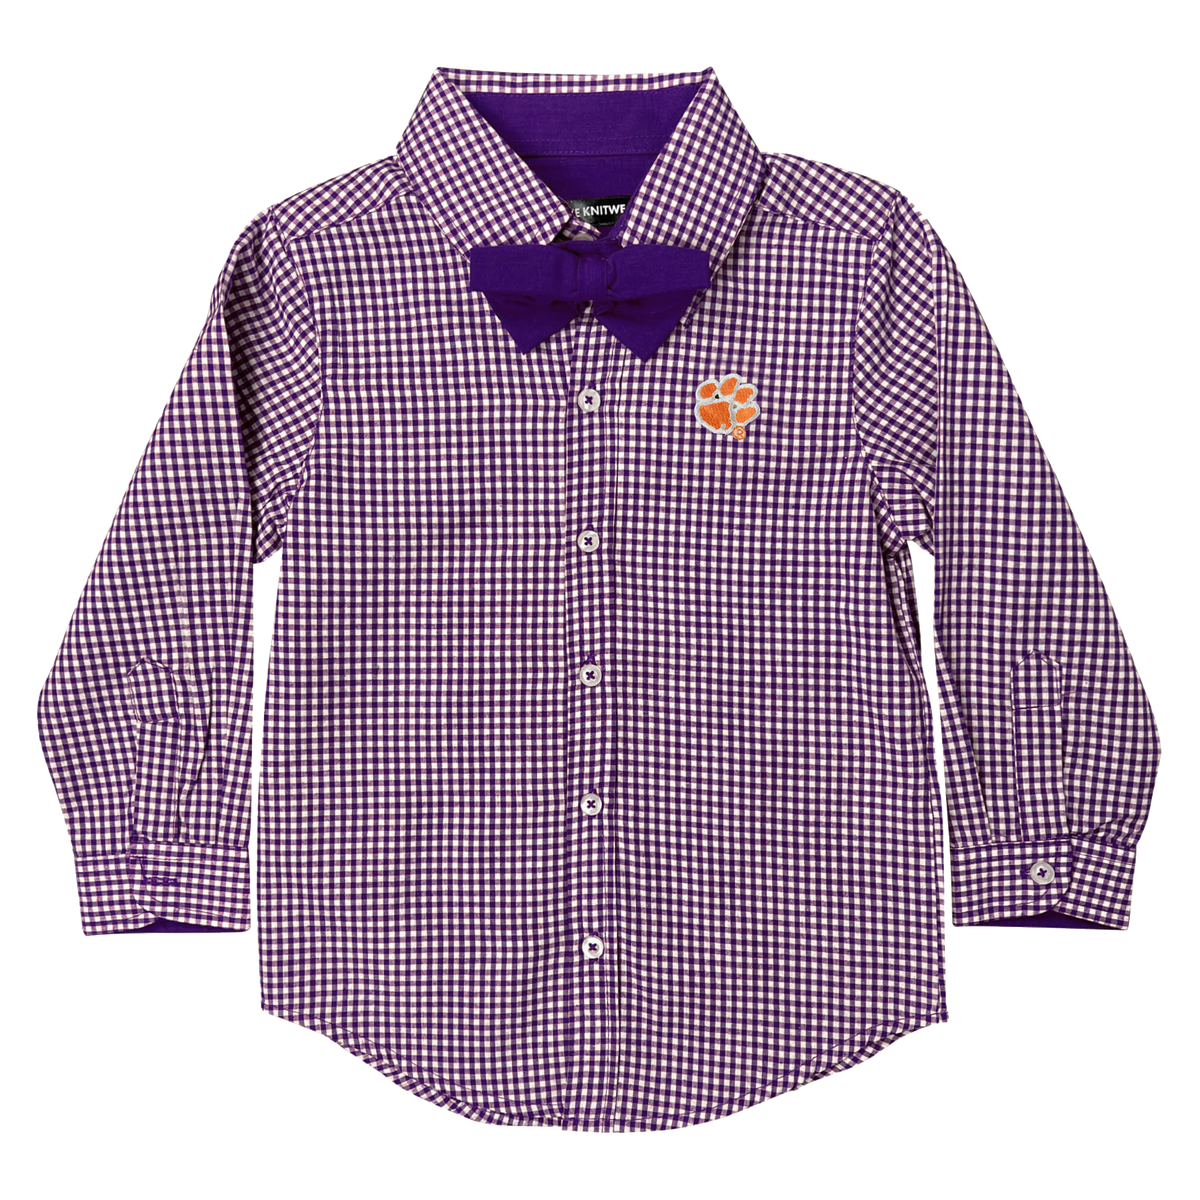 Clemson Purple Long Sleeve Gingham Button Down Shirt with Bowtie and Paw - Infant/Toddler - Youth